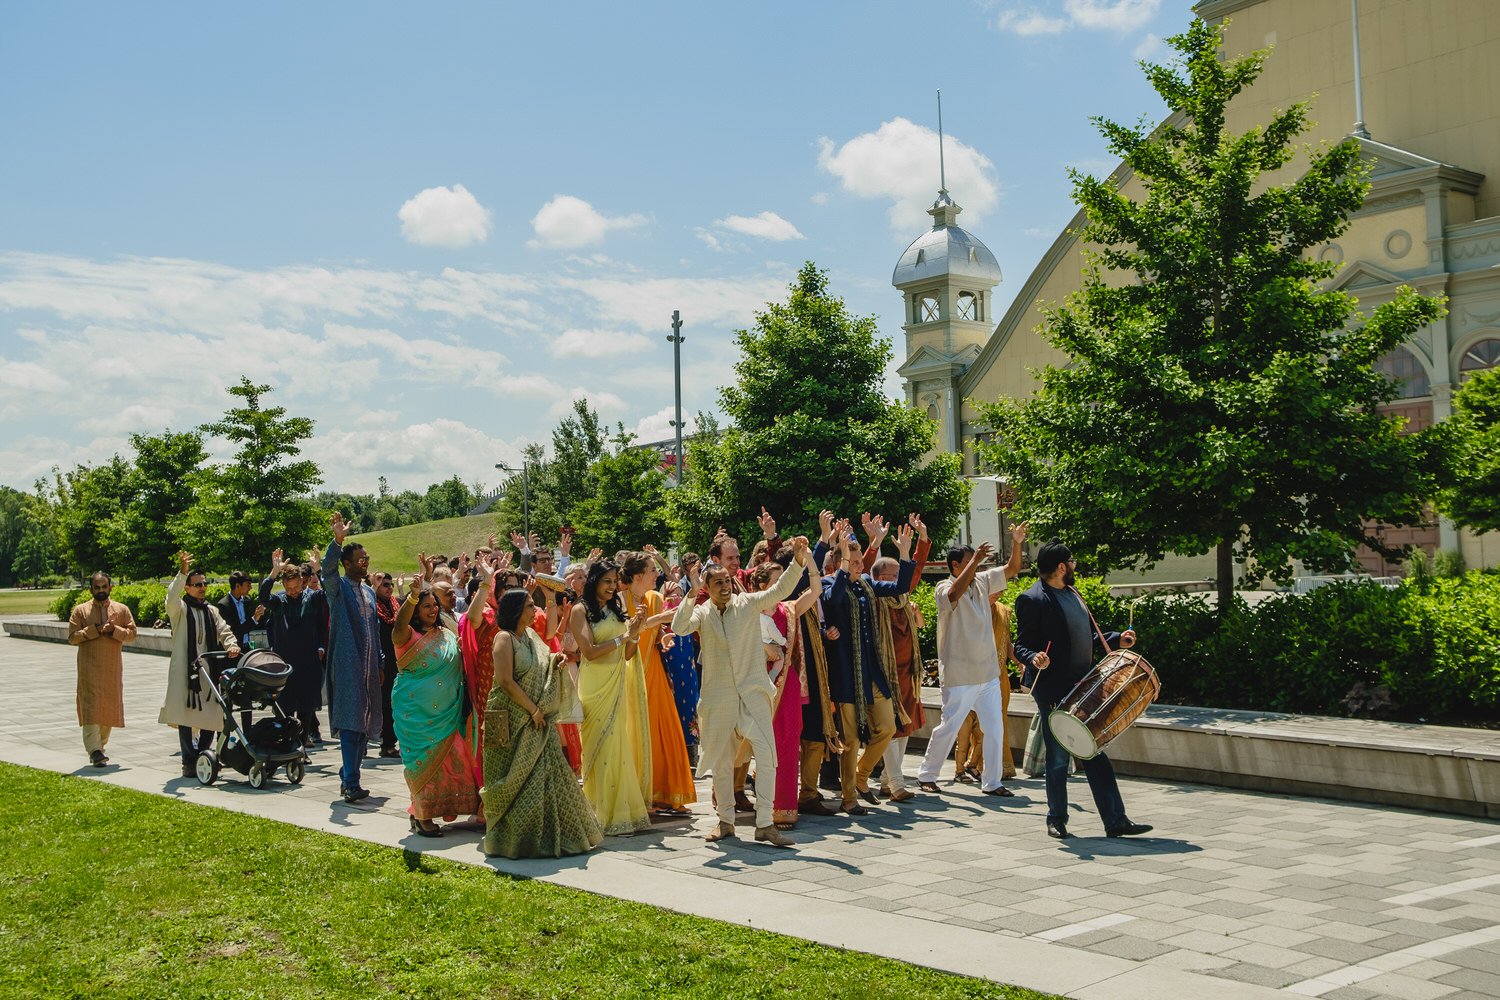 barraat wedding tradition outside the horticulture building at Landsdowne park in ottawa